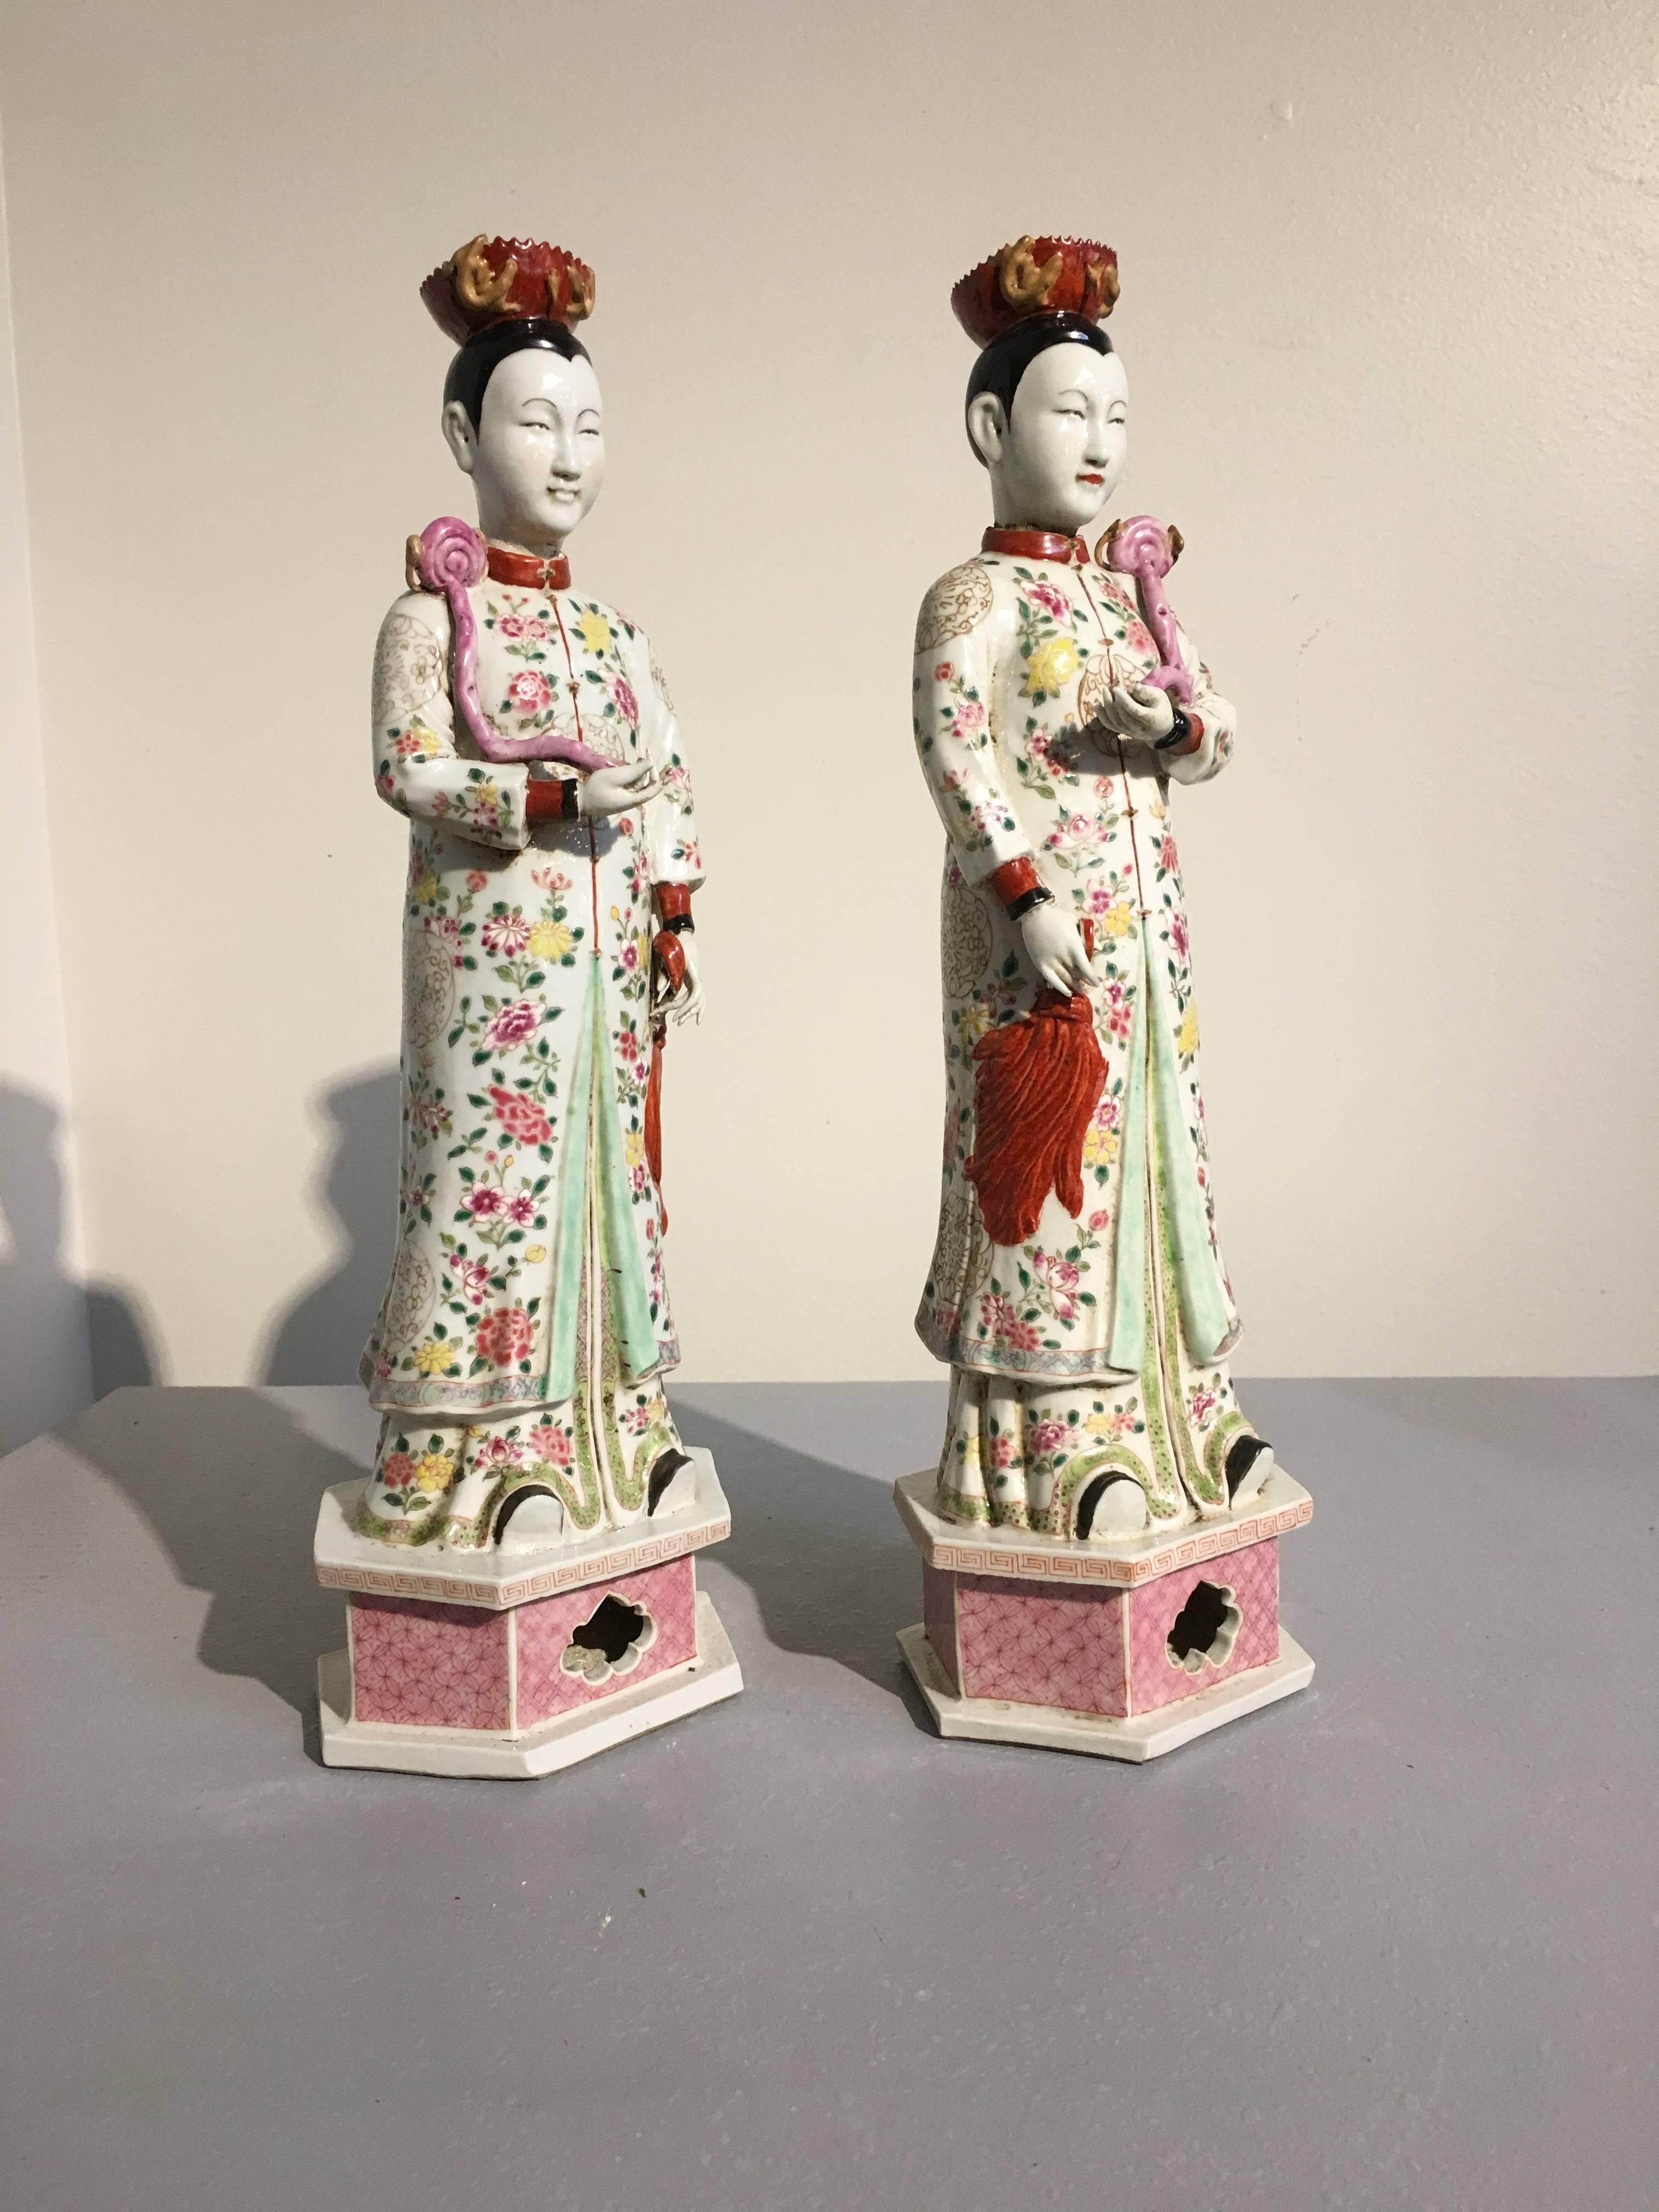 A beautiful pair of famille rose enameled Chinese nodding porcelain models of court ladies. Made of the export market during Daoguang period (1820 to 1850).
The gracious maidens stand upon a hexagonal plinth, wearing long informal surcoats